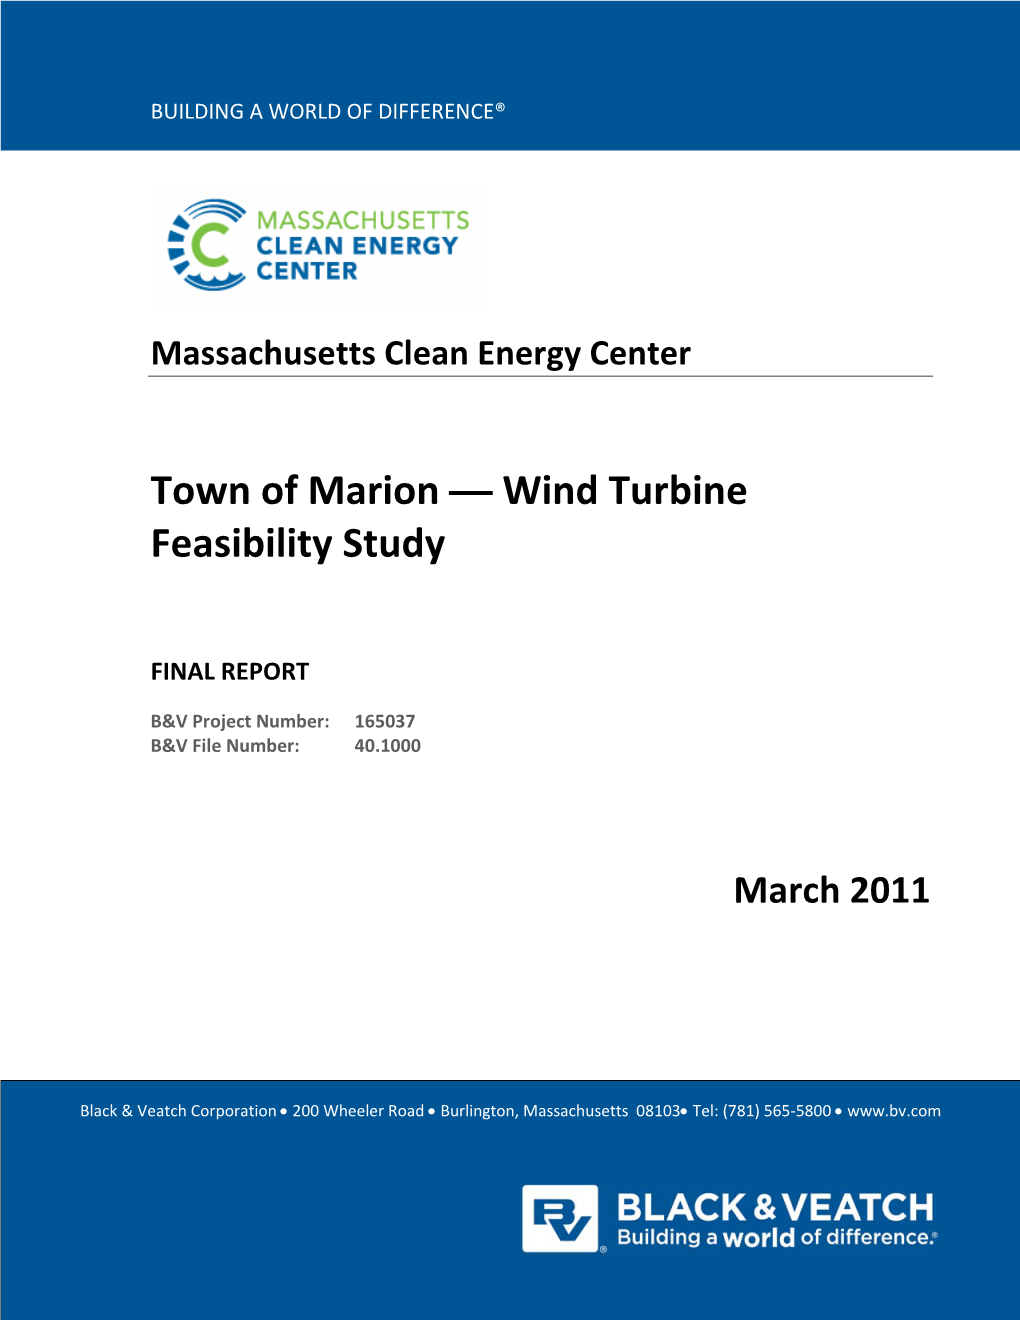 Town of Marion — Wind Turbine Feasibility Study Report Revisions and Record of Issue